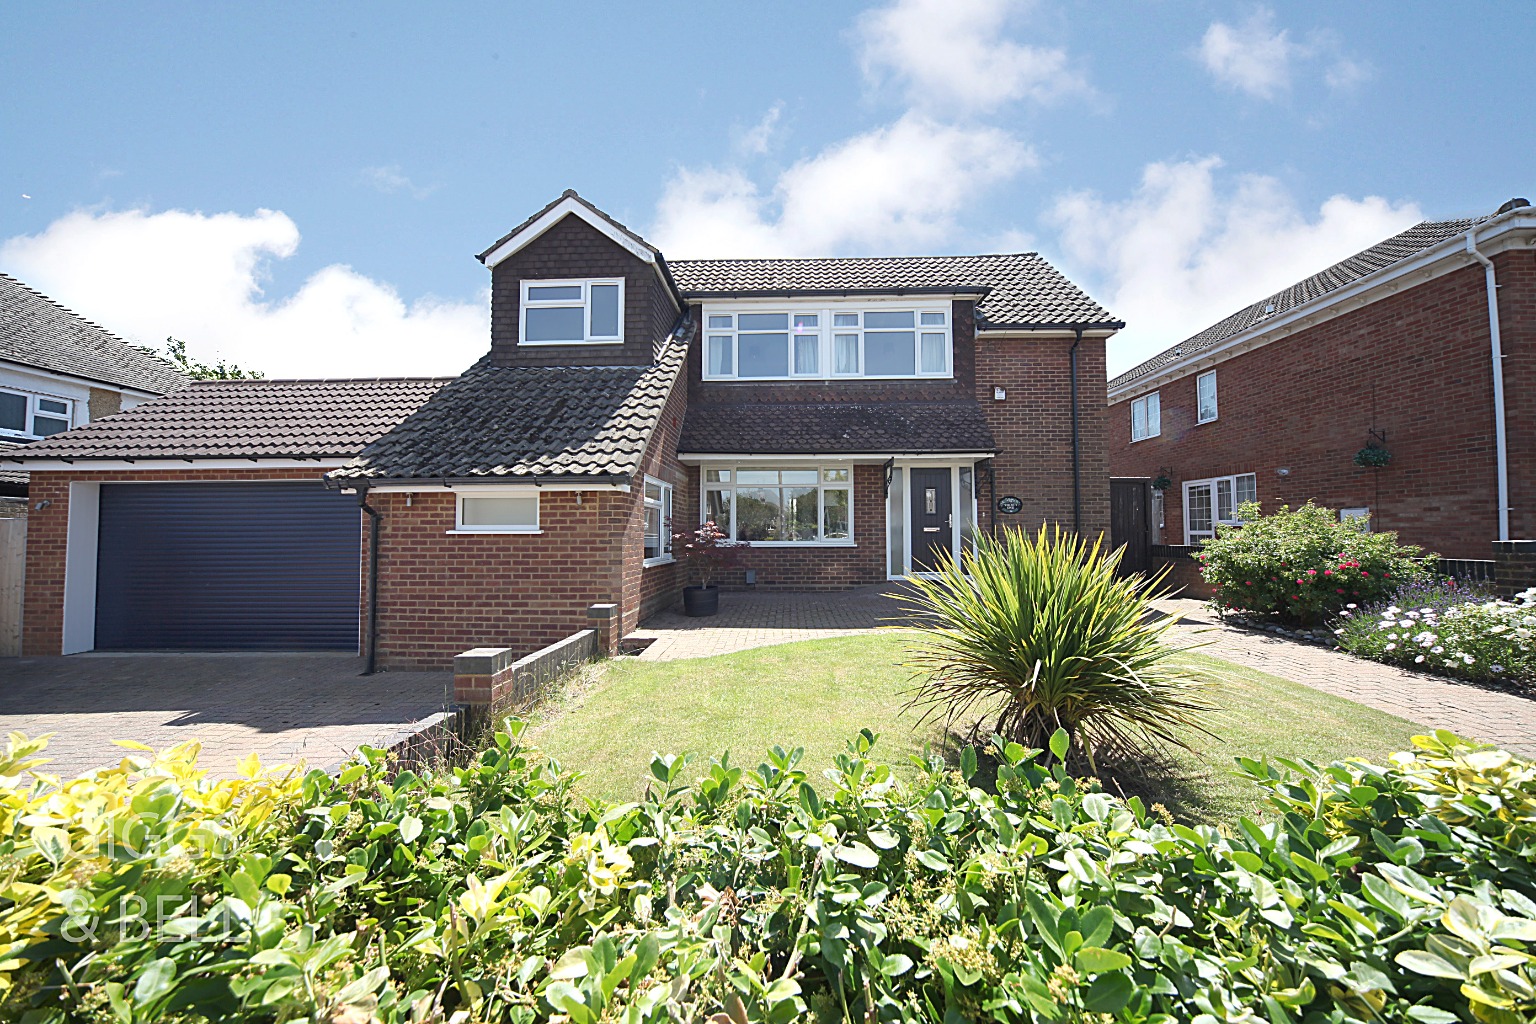 This outstanding detached family home has been thoughtfully extended and improved by the current owners and is a credit to their dedication.